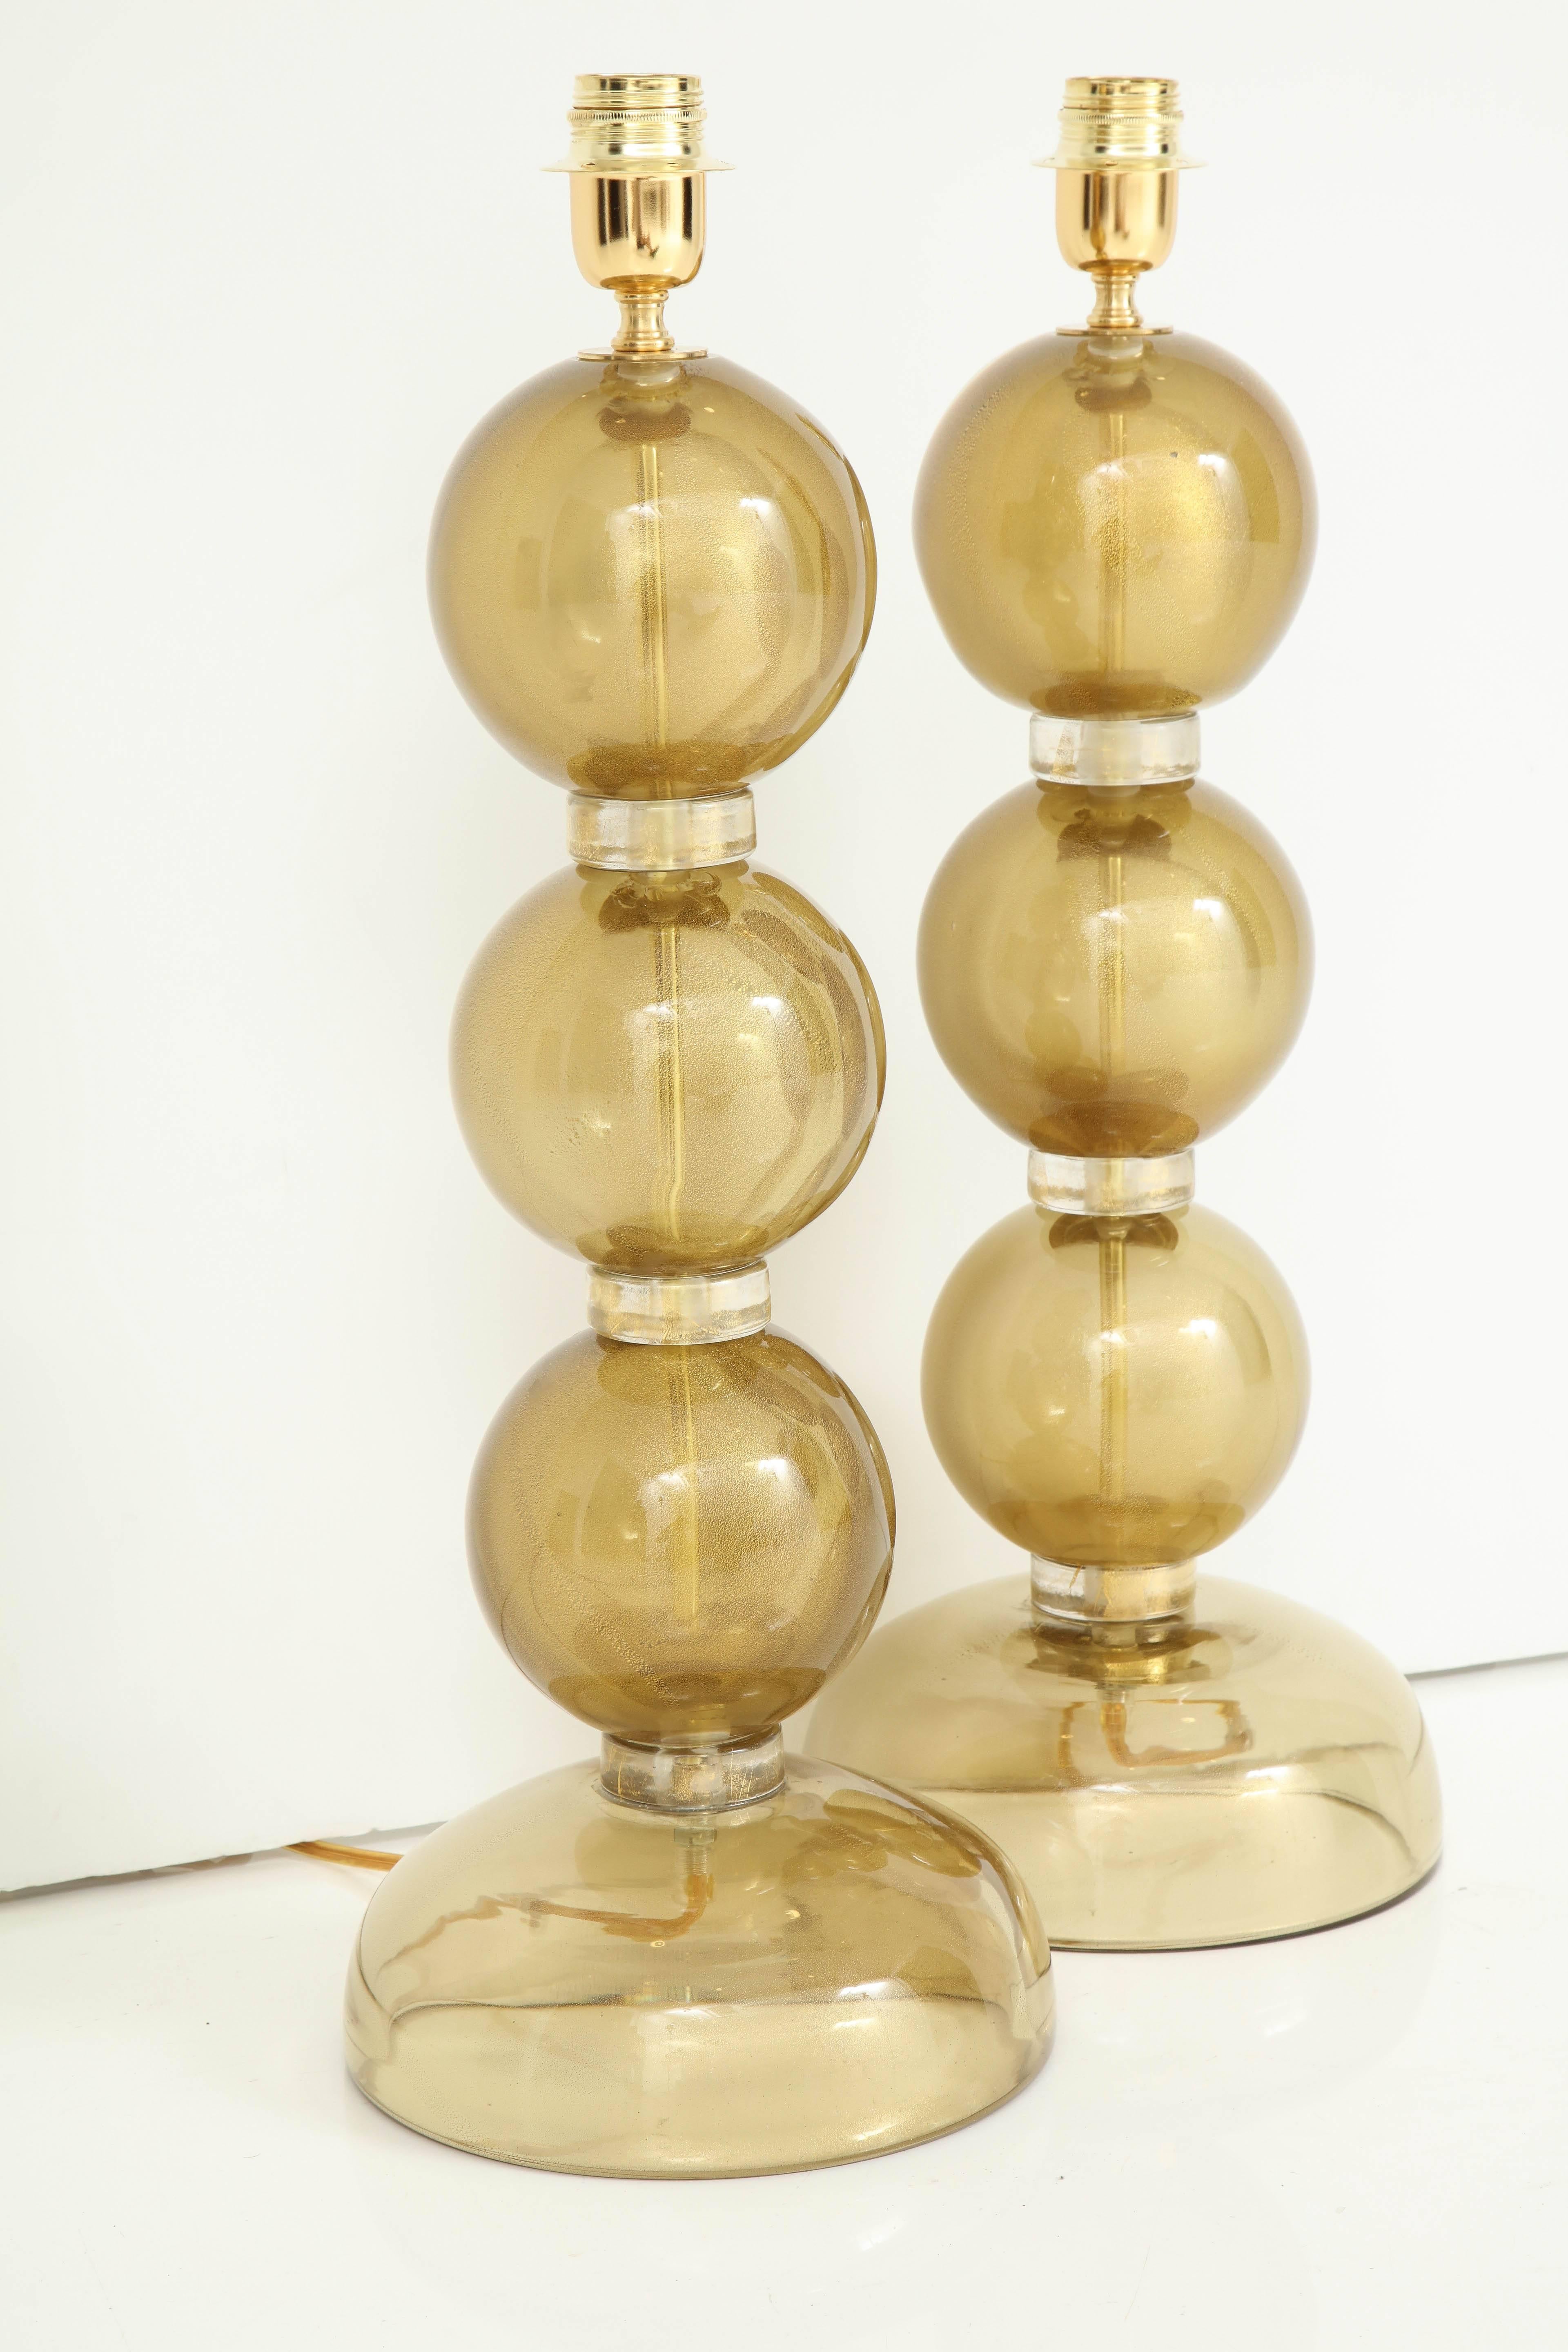 Pair of lamps consisting of hand blown clear Murano glass infused with 23-karat gold, creating a rich and luminous gold effect. Each of the three spheres are separated by glass rings with gold flecks. Handmade in Venice, Italy. The height of the